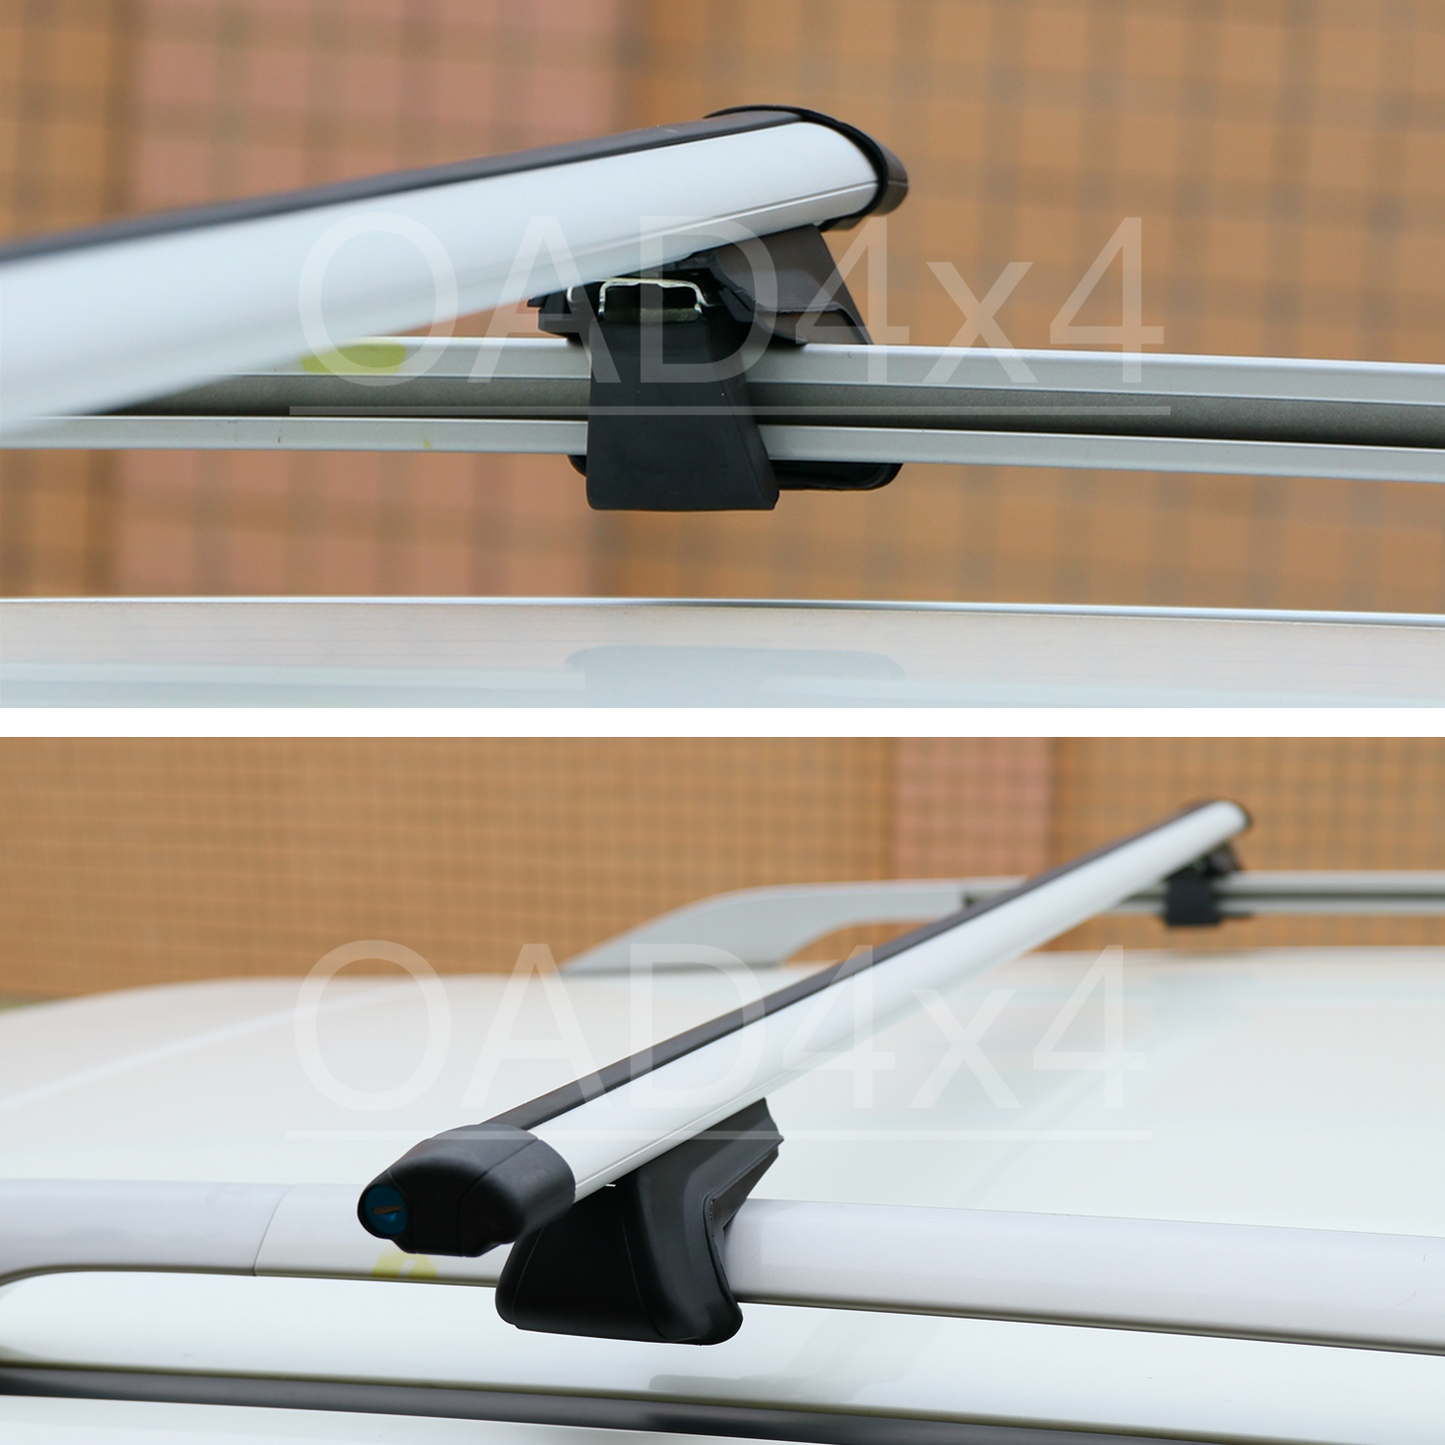 1 Pair Aluminum Silver Cross Bar Roof Racks Baggage holder for Subaru 5 Gen Outback 14-20 with raised roof rail